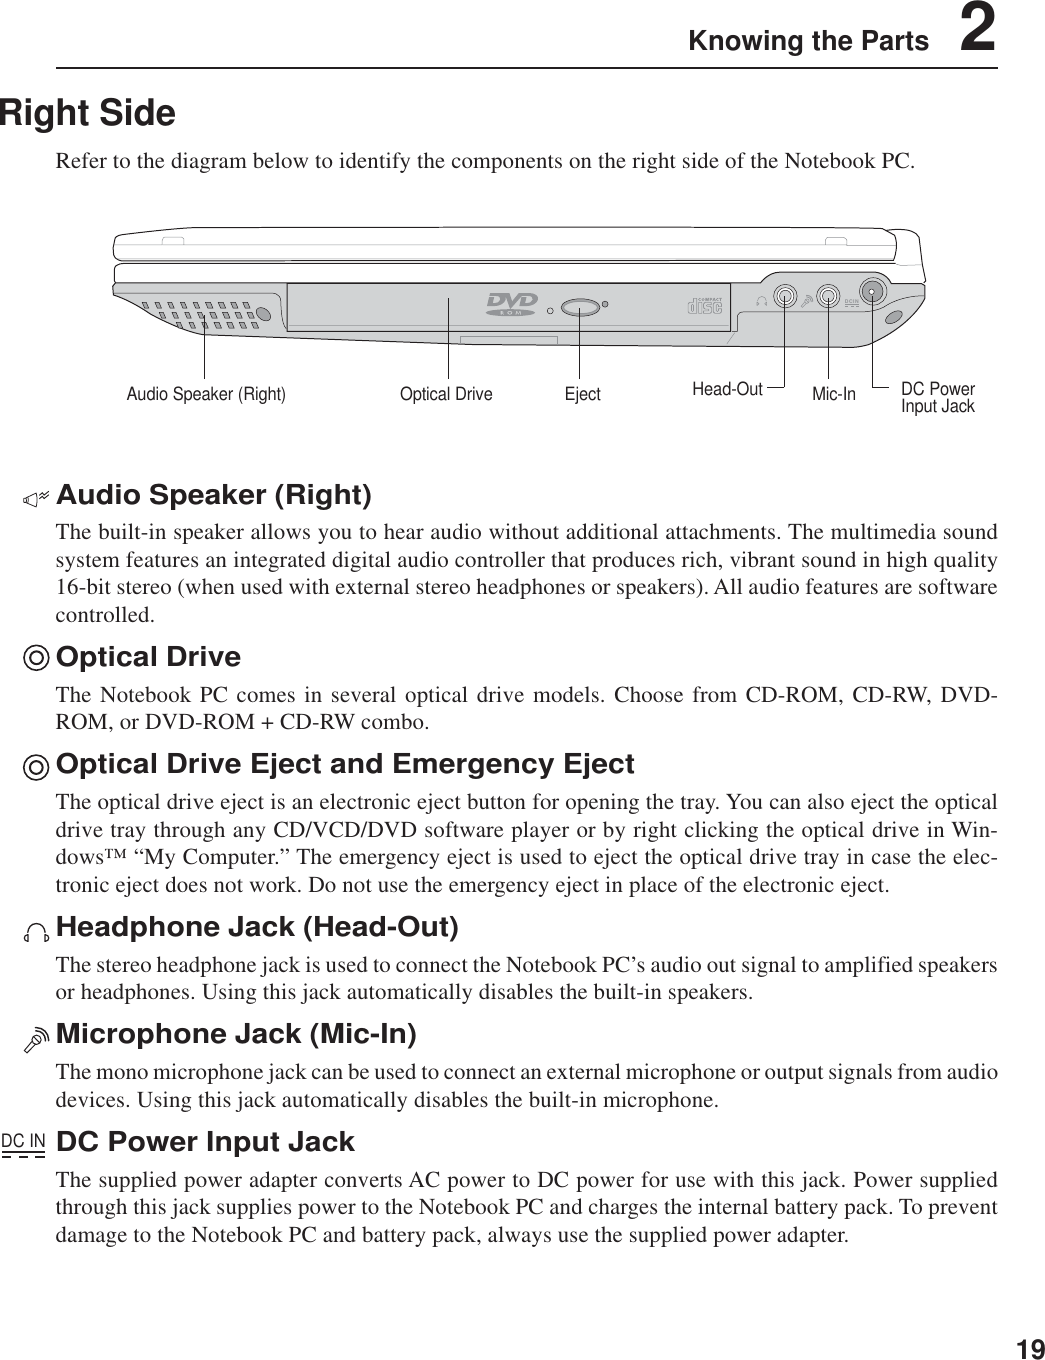 19Knowing the Parts    2Right SideRefer to the diagram below to identify the components on the right side of the Notebook PC.Audio Speaker (Right)The built-in speaker allows you to hear audio without additional attachments. The multimedia soundsystem features an integrated digital audio controller that produces rich, vibrant sound in high quality16-bit stereo (when used with external stereo headphones or speakers). All audio features are softwarecontrolled.Optical DriveThe Notebook PC comes in several optical drive models. Choose from CD-ROM, CD-RW, DVD-ROM, or DVD-ROM + CD-RW combo.Optical Drive Eject and Emergency EjectThe optical drive eject is an electronic eject button for opening the tray. You can also eject the opticaldrive tray through any CD/VCD/DVD software player or by right clicking the optical drive in Win-dows™ “My Computer.” The emergency eject is used to eject the optical drive tray in case the elec-tronic eject does not work. Do not use the emergency eject in place of the electronic eject.Headphone Jack (Head-Out)The stereo headphone jack is used to connect the Notebook PC’s audio out signal to amplified speakersor headphones. Using this jack automatically disables the built-in speakers.Microphone Jack (Mic-In)The mono microphone jack can be used to connect an external microphone or output signals from audiodevices. Using this jack automatically disables the built-in microphone.DC Power Input JackThe supplied power adapter converts AC power to DC power for use with this jack. Power suppliedthrough this jack supplies power to the Notebook PC and charges the internal battery pack. To preventdamage to the Notebook PC and battery pack, always use the supplied power adapter.DC INDCINOptical Drive DC PowerInput JackAudio Speaker (Right) Mic-InHead-OutEject